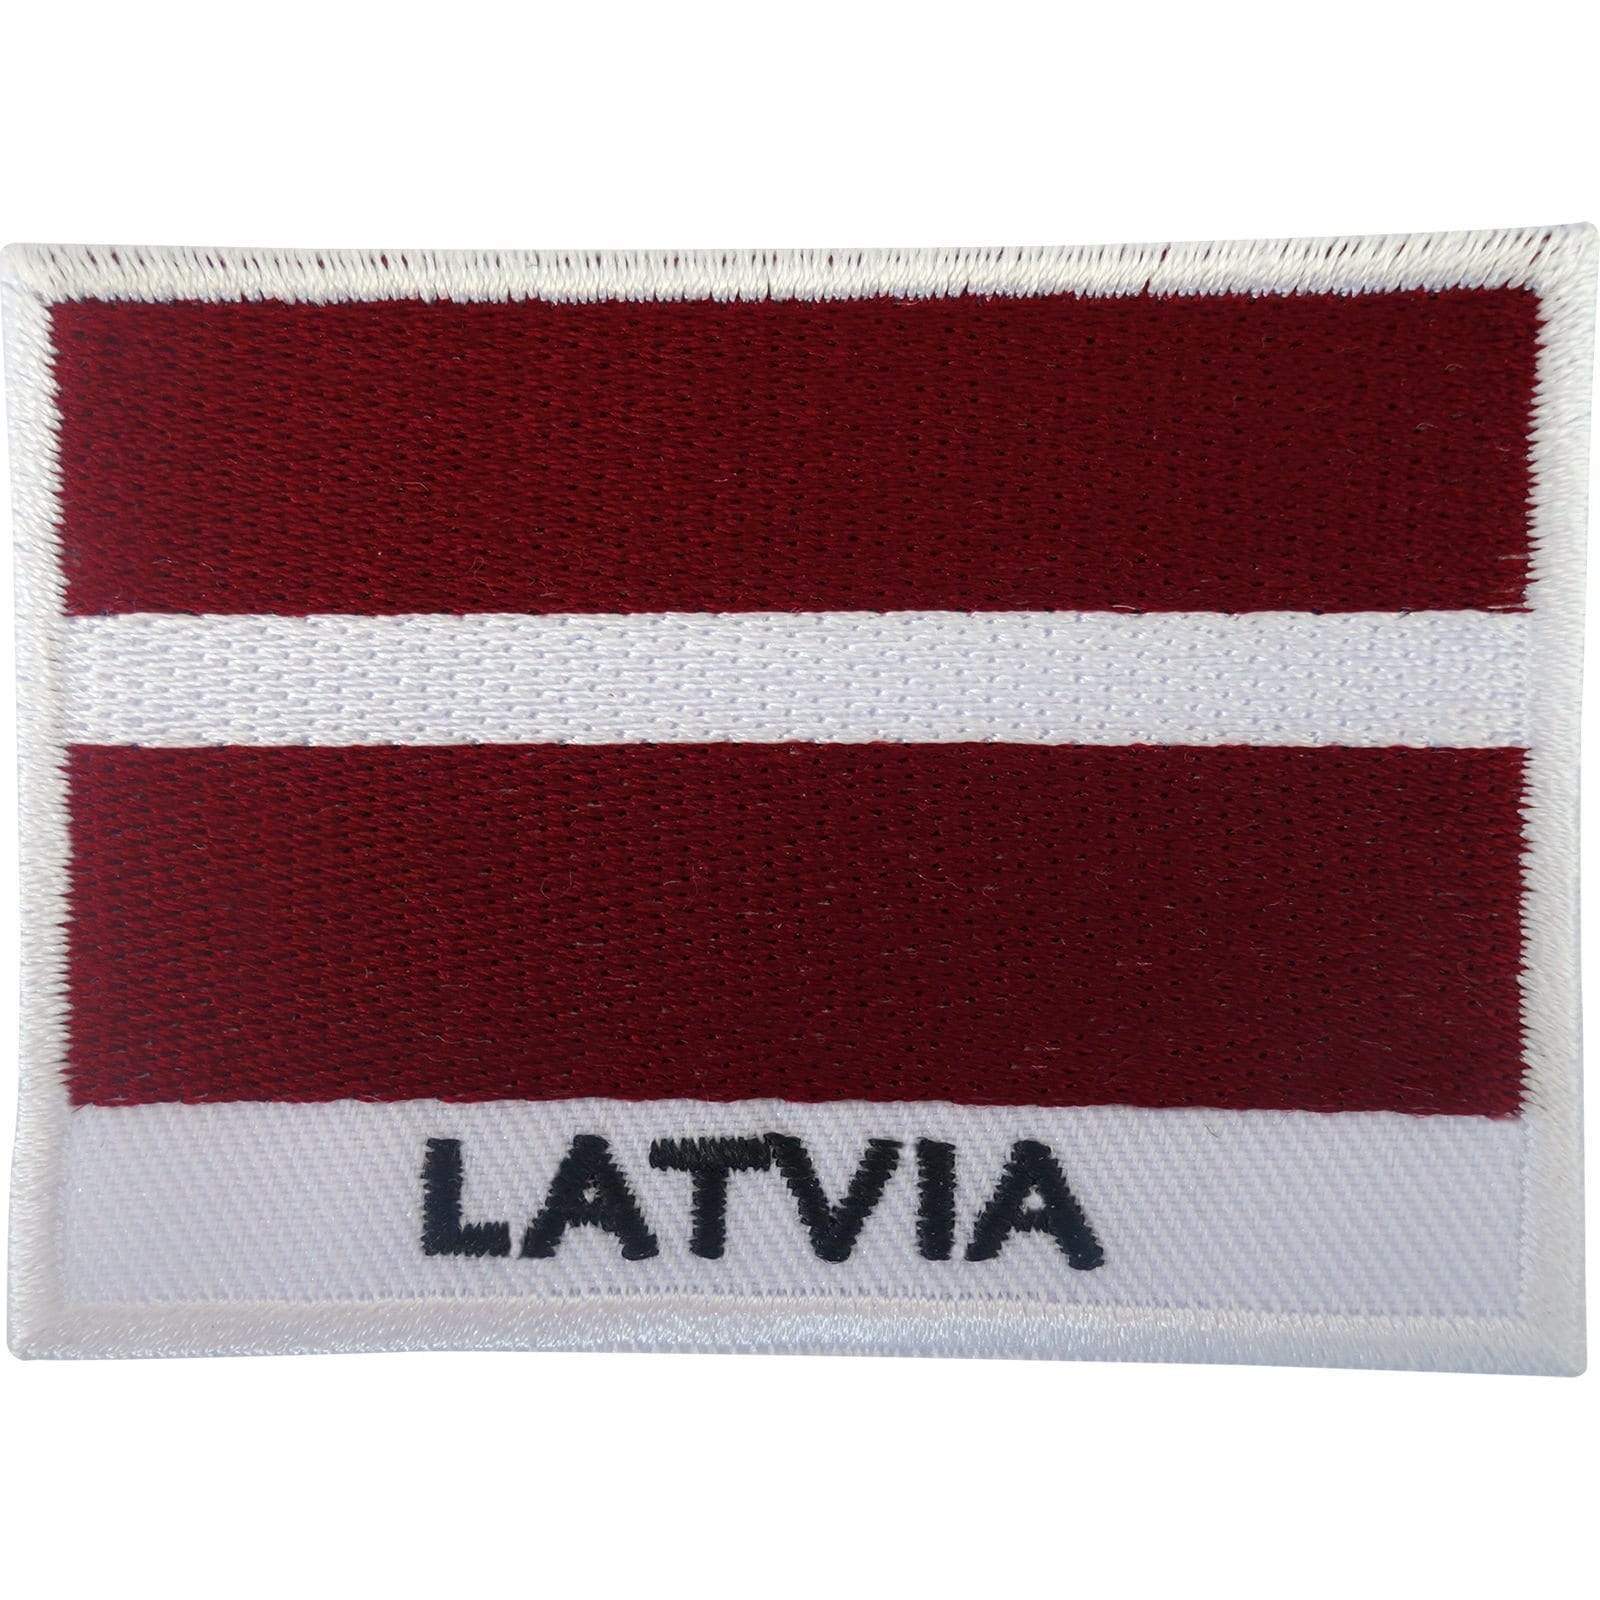 Latvia Flag Patch Iron On / Sew On Badge Embroidered Embroidery Latvian Applique